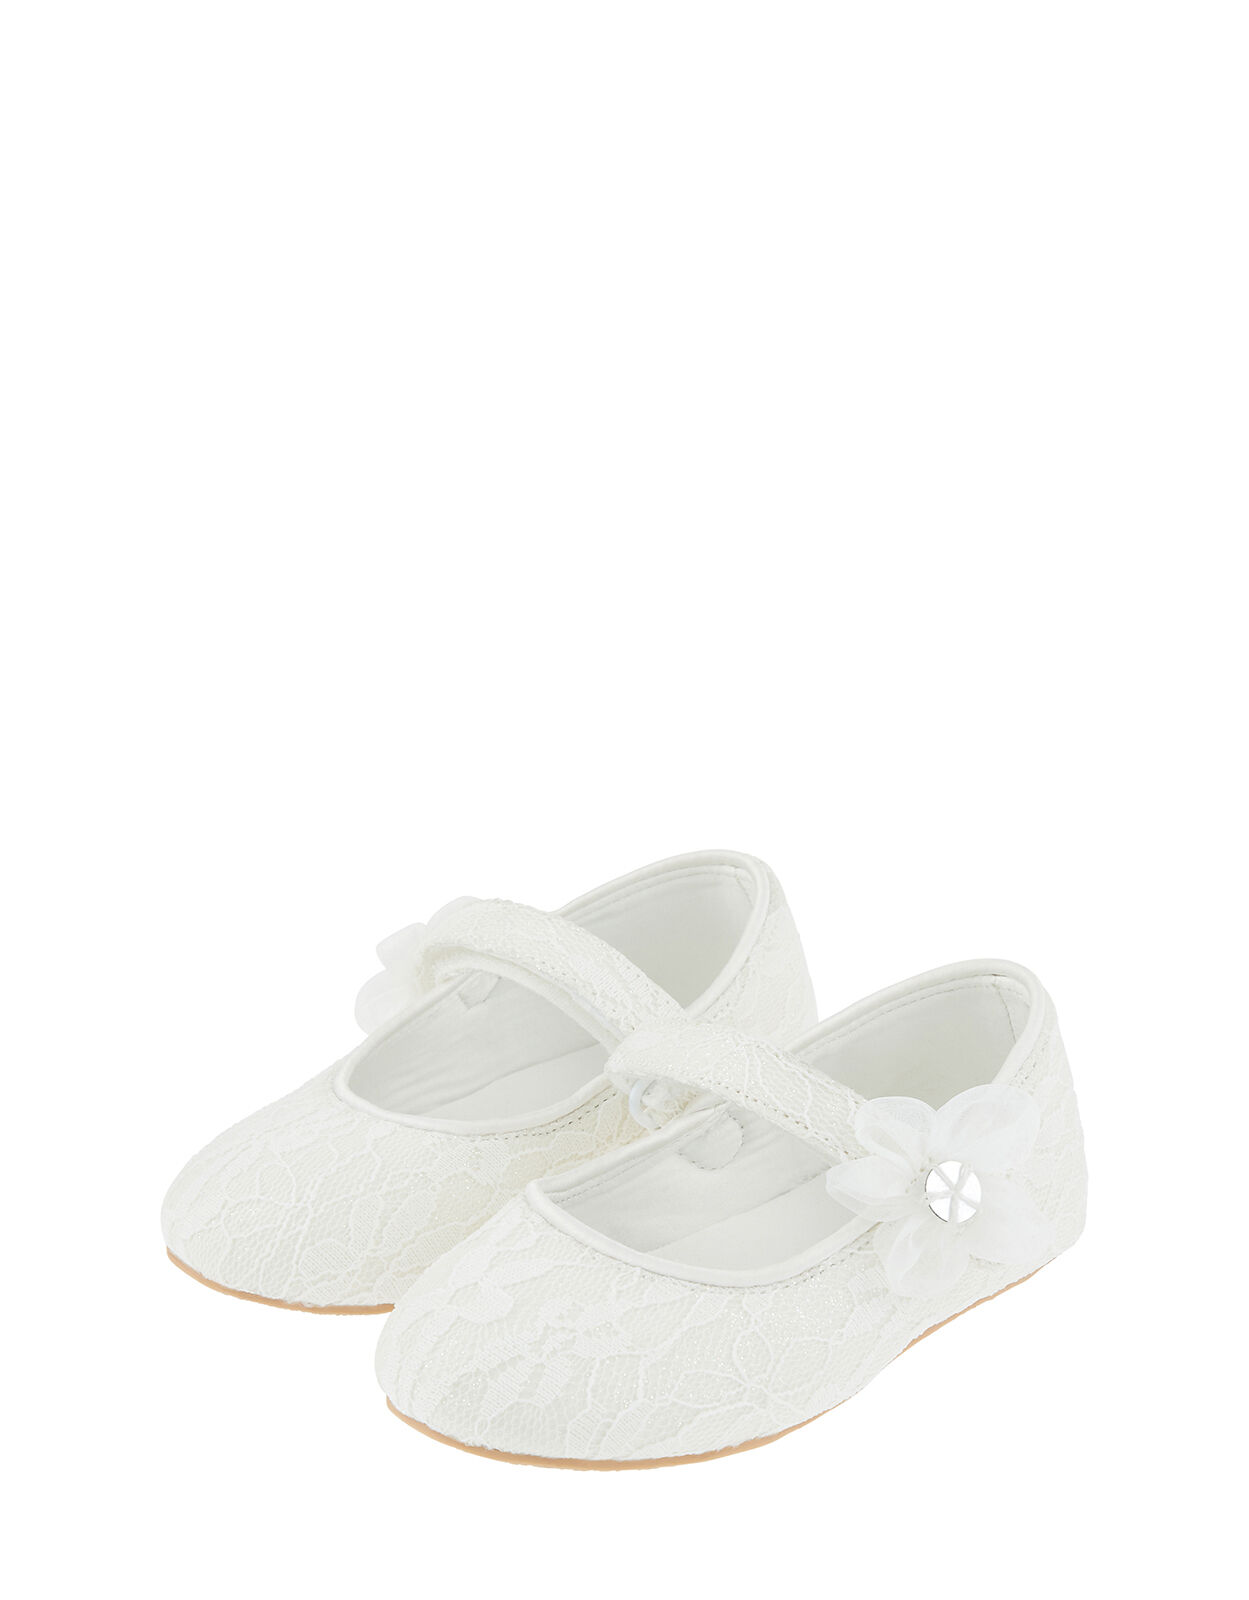 Baby Shoes | Children's | Monsoon Global